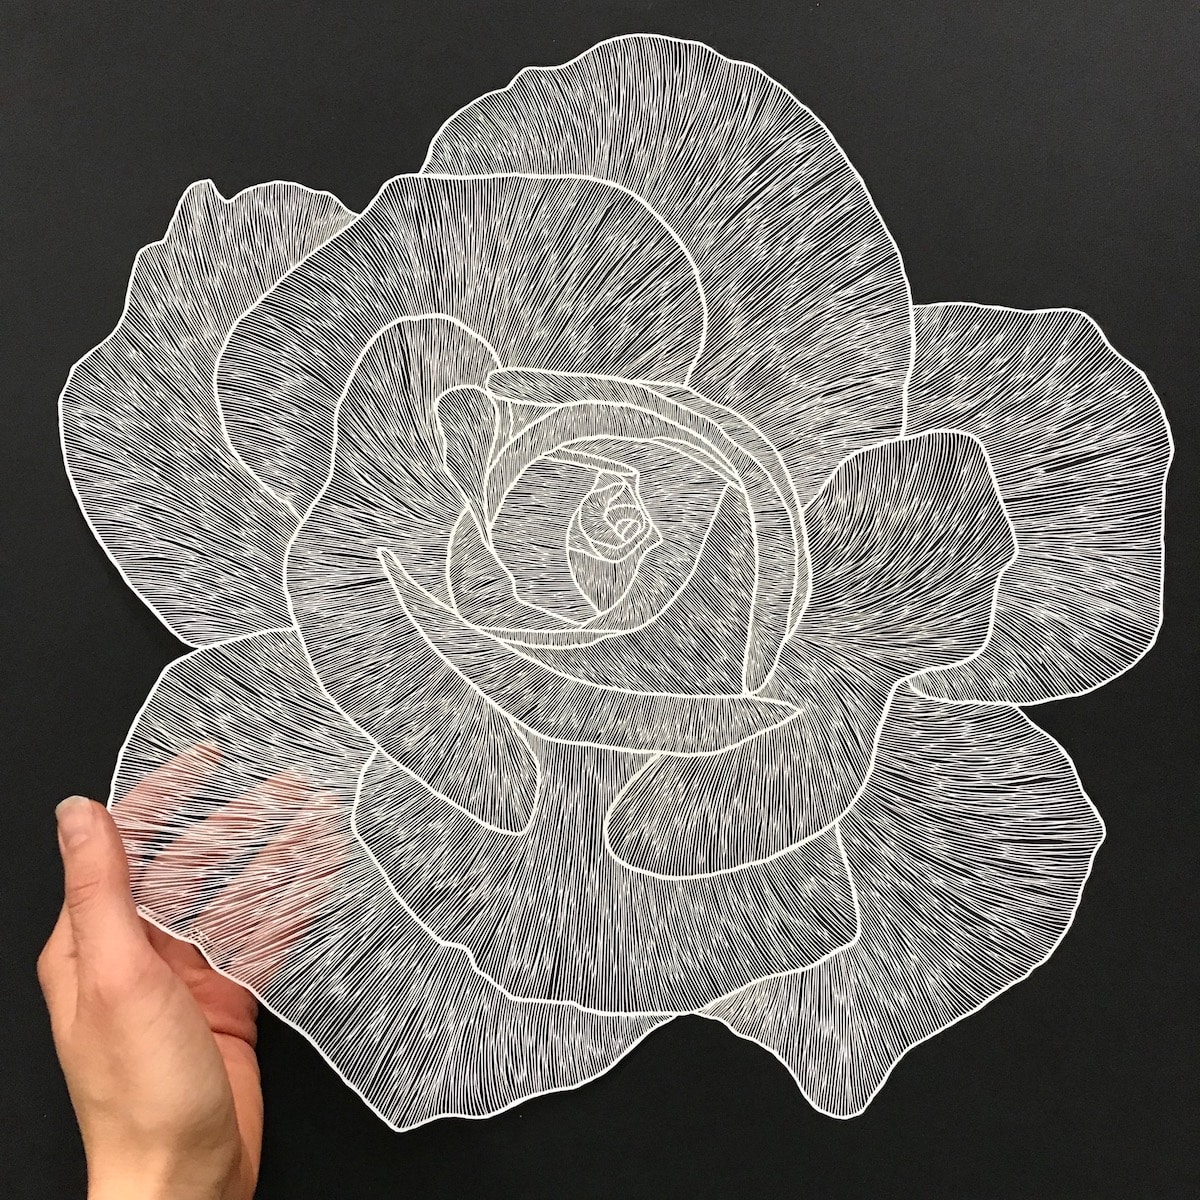 Paper Cut Out Art by Maude White